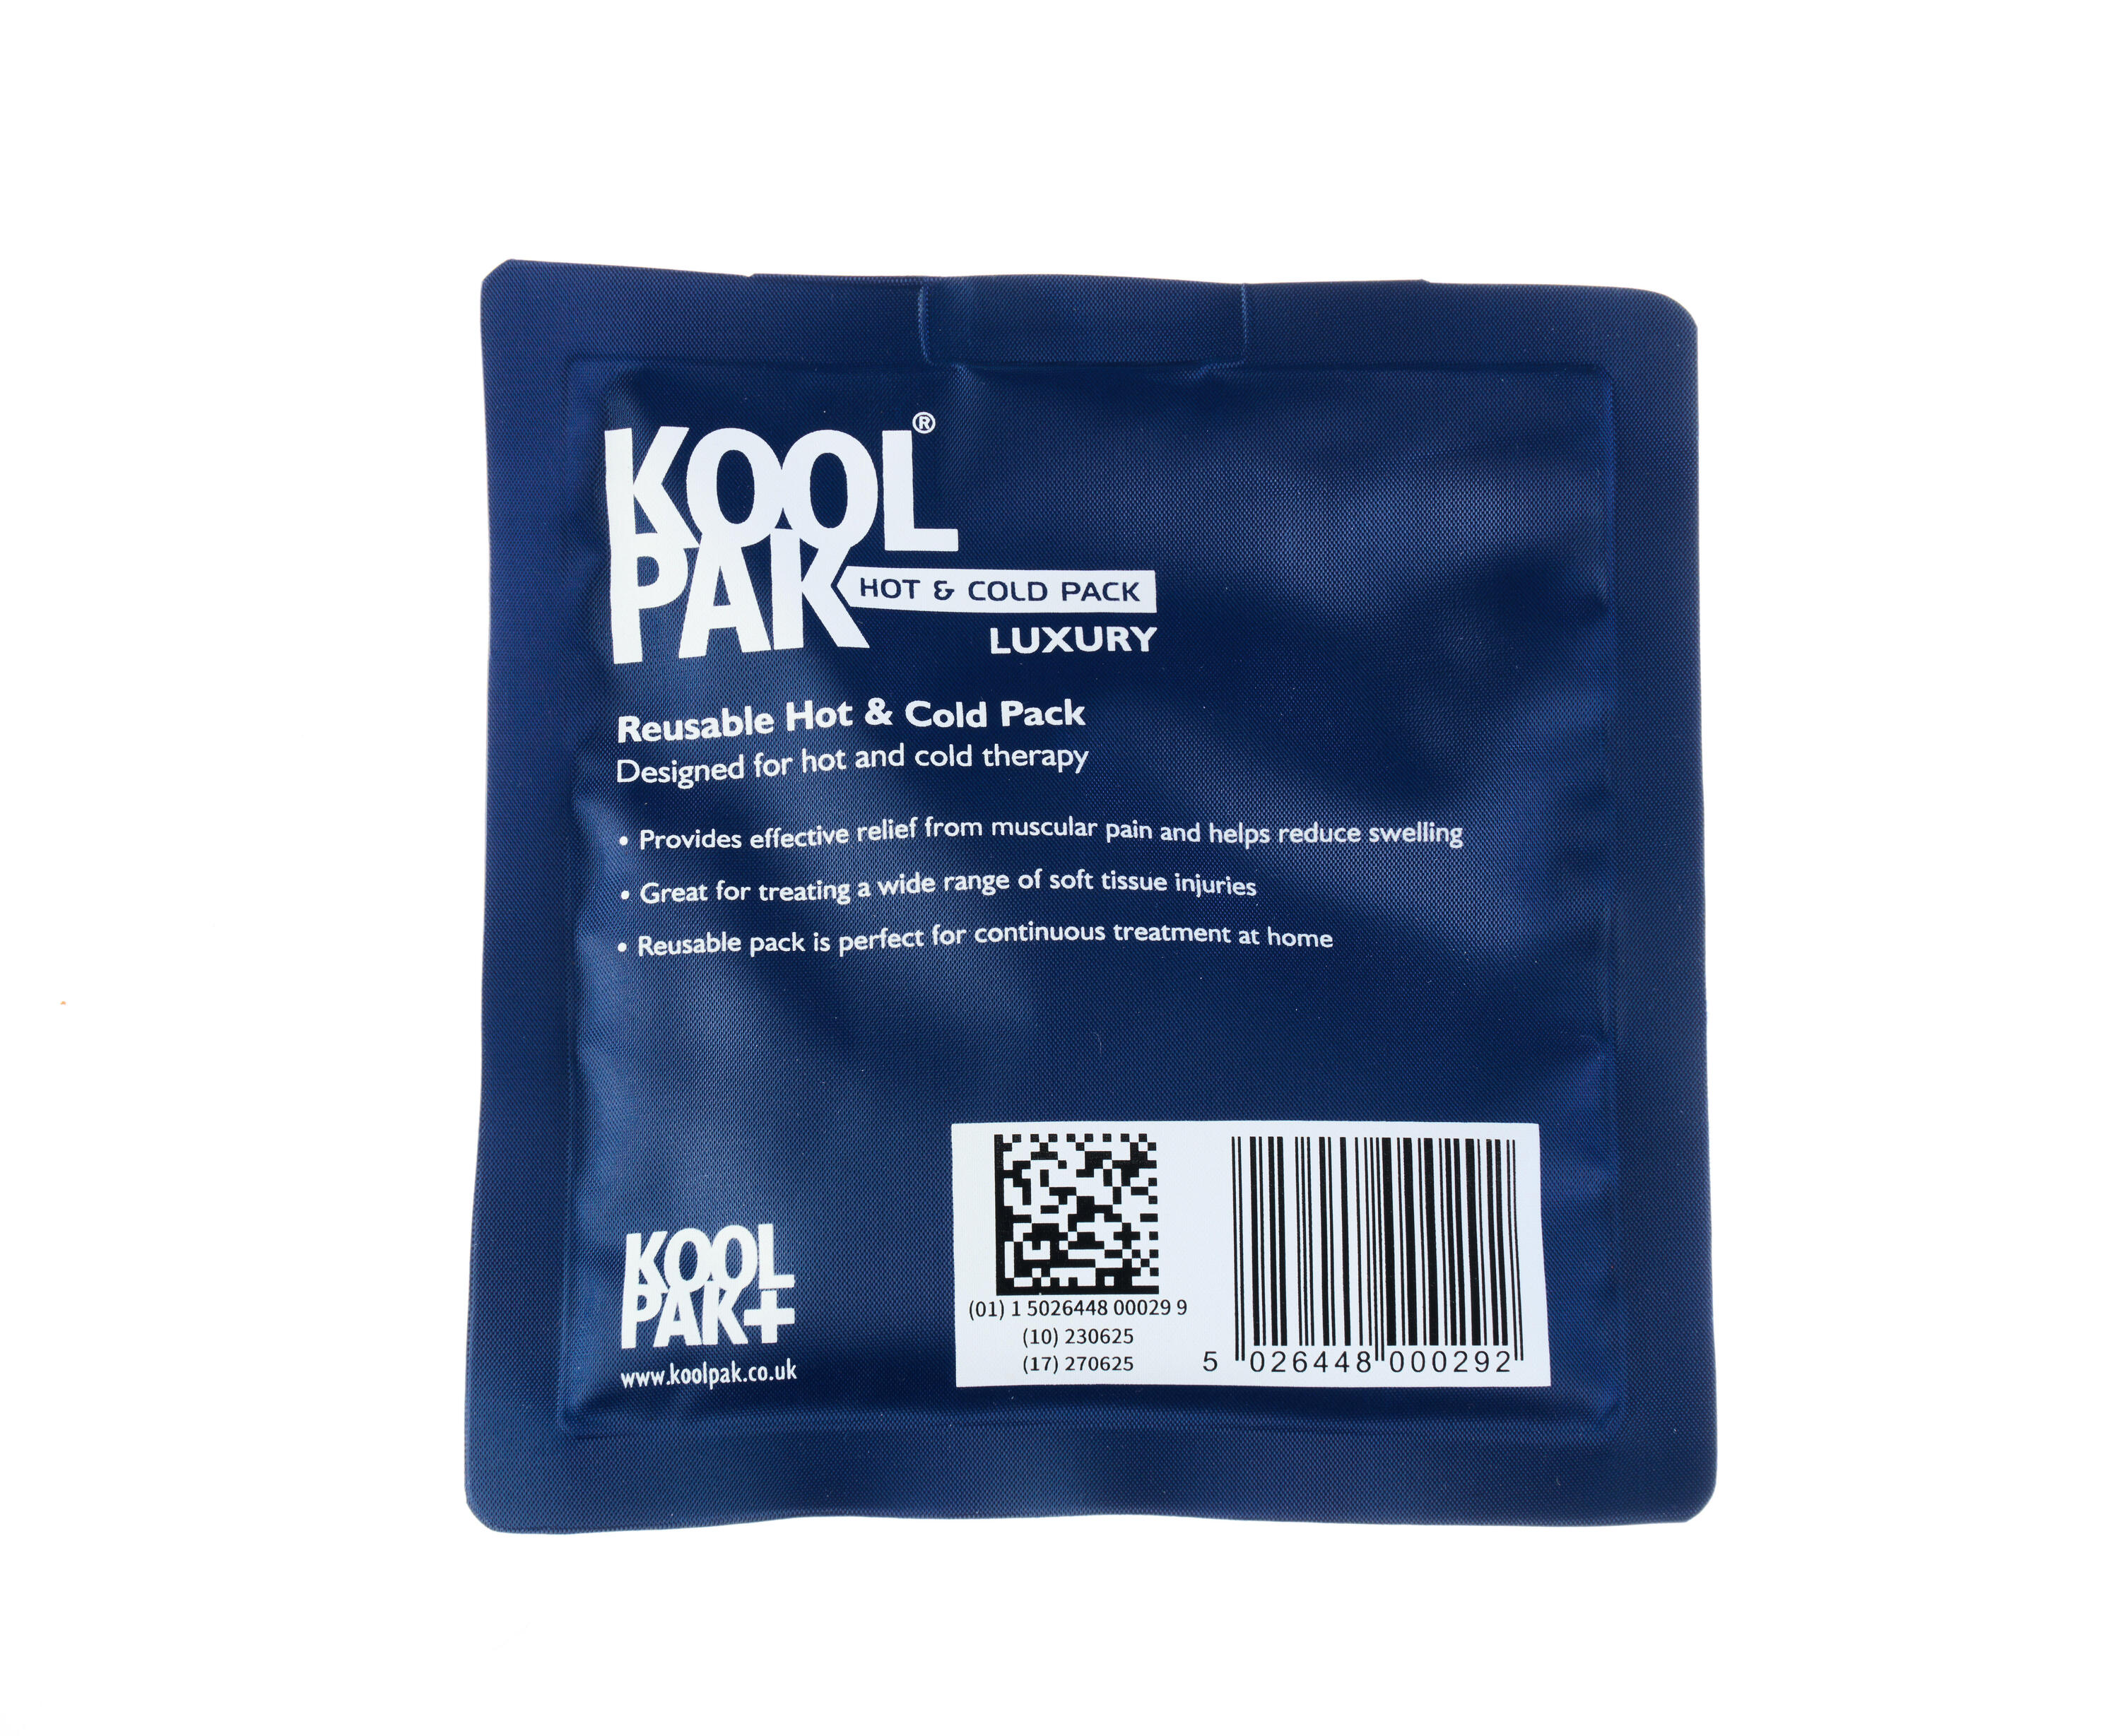 Koolpak Luxury Reusable Hot And Cold Pack 13 X 14cm - Pack Of 20 1/3